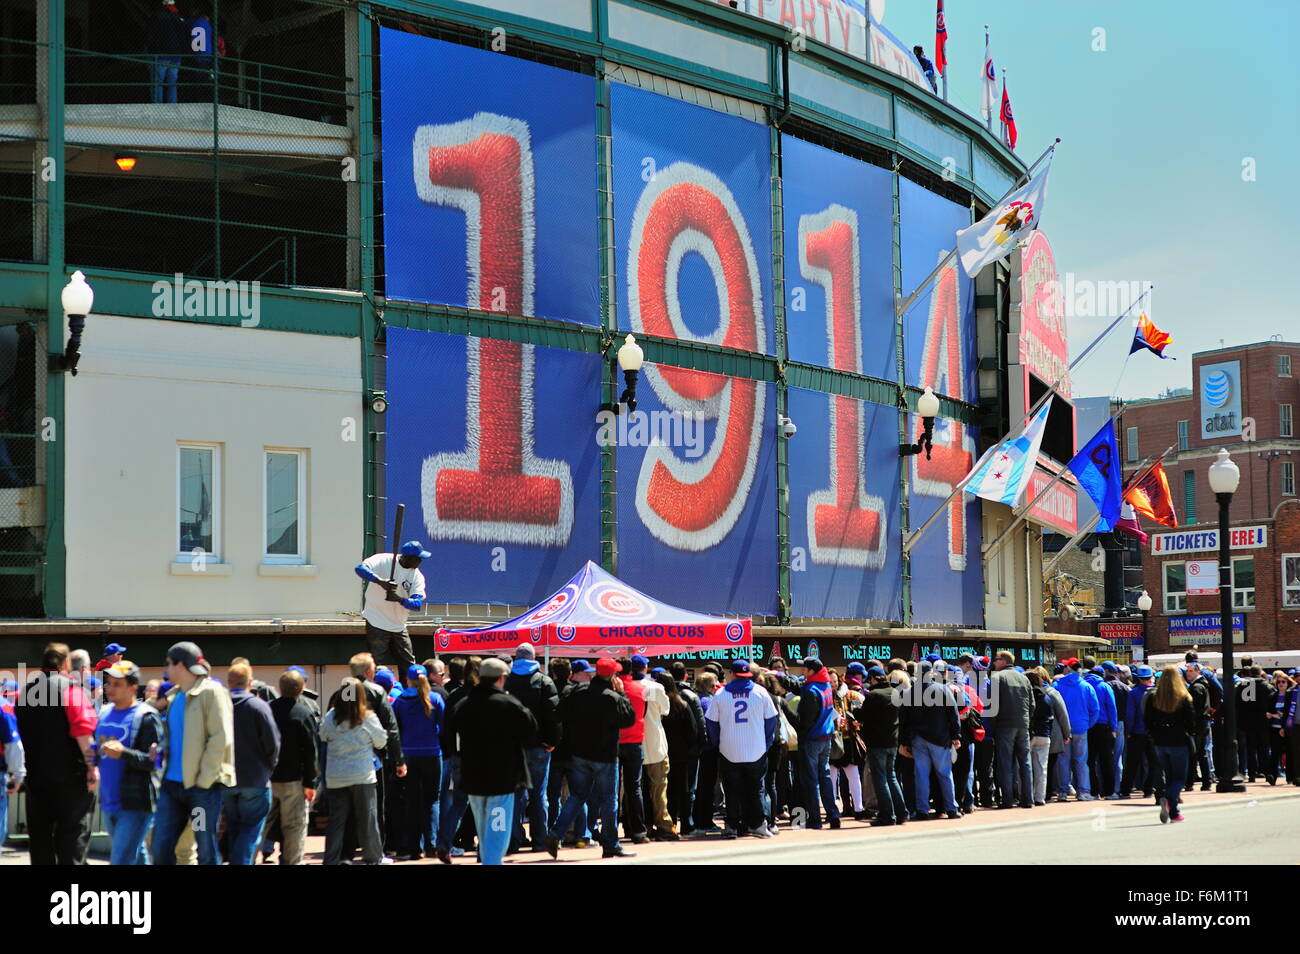 Fans line up in large numbers waiting to enter the main entrance at Wrigley Field, the home of the Chicago Cubs. Chicago, Illinois, USA. Stock Photo